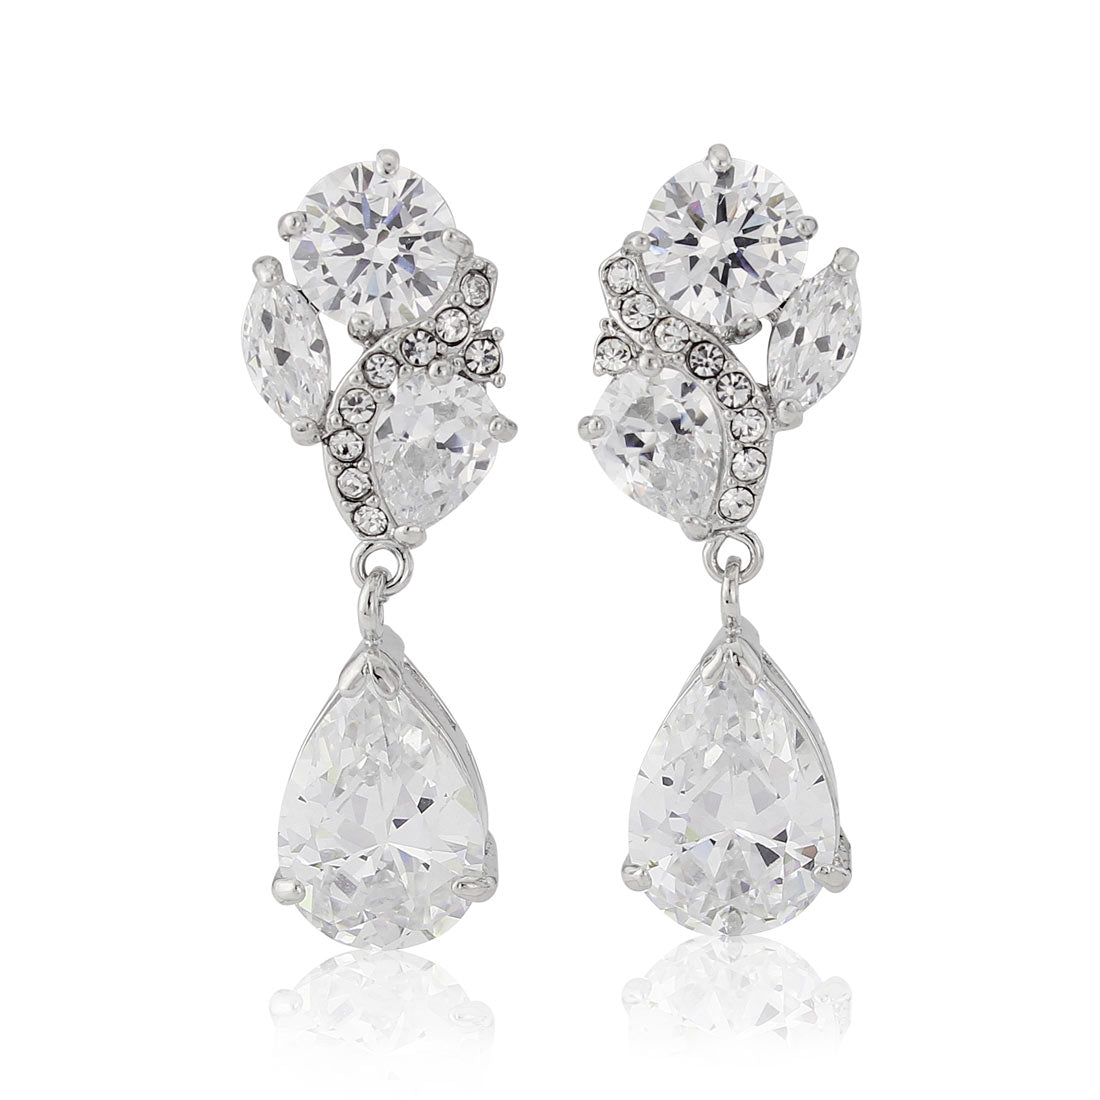 Starlet's Extravagance Cubic Zirconia Drop Clip On Earrings for Brides & Occasions